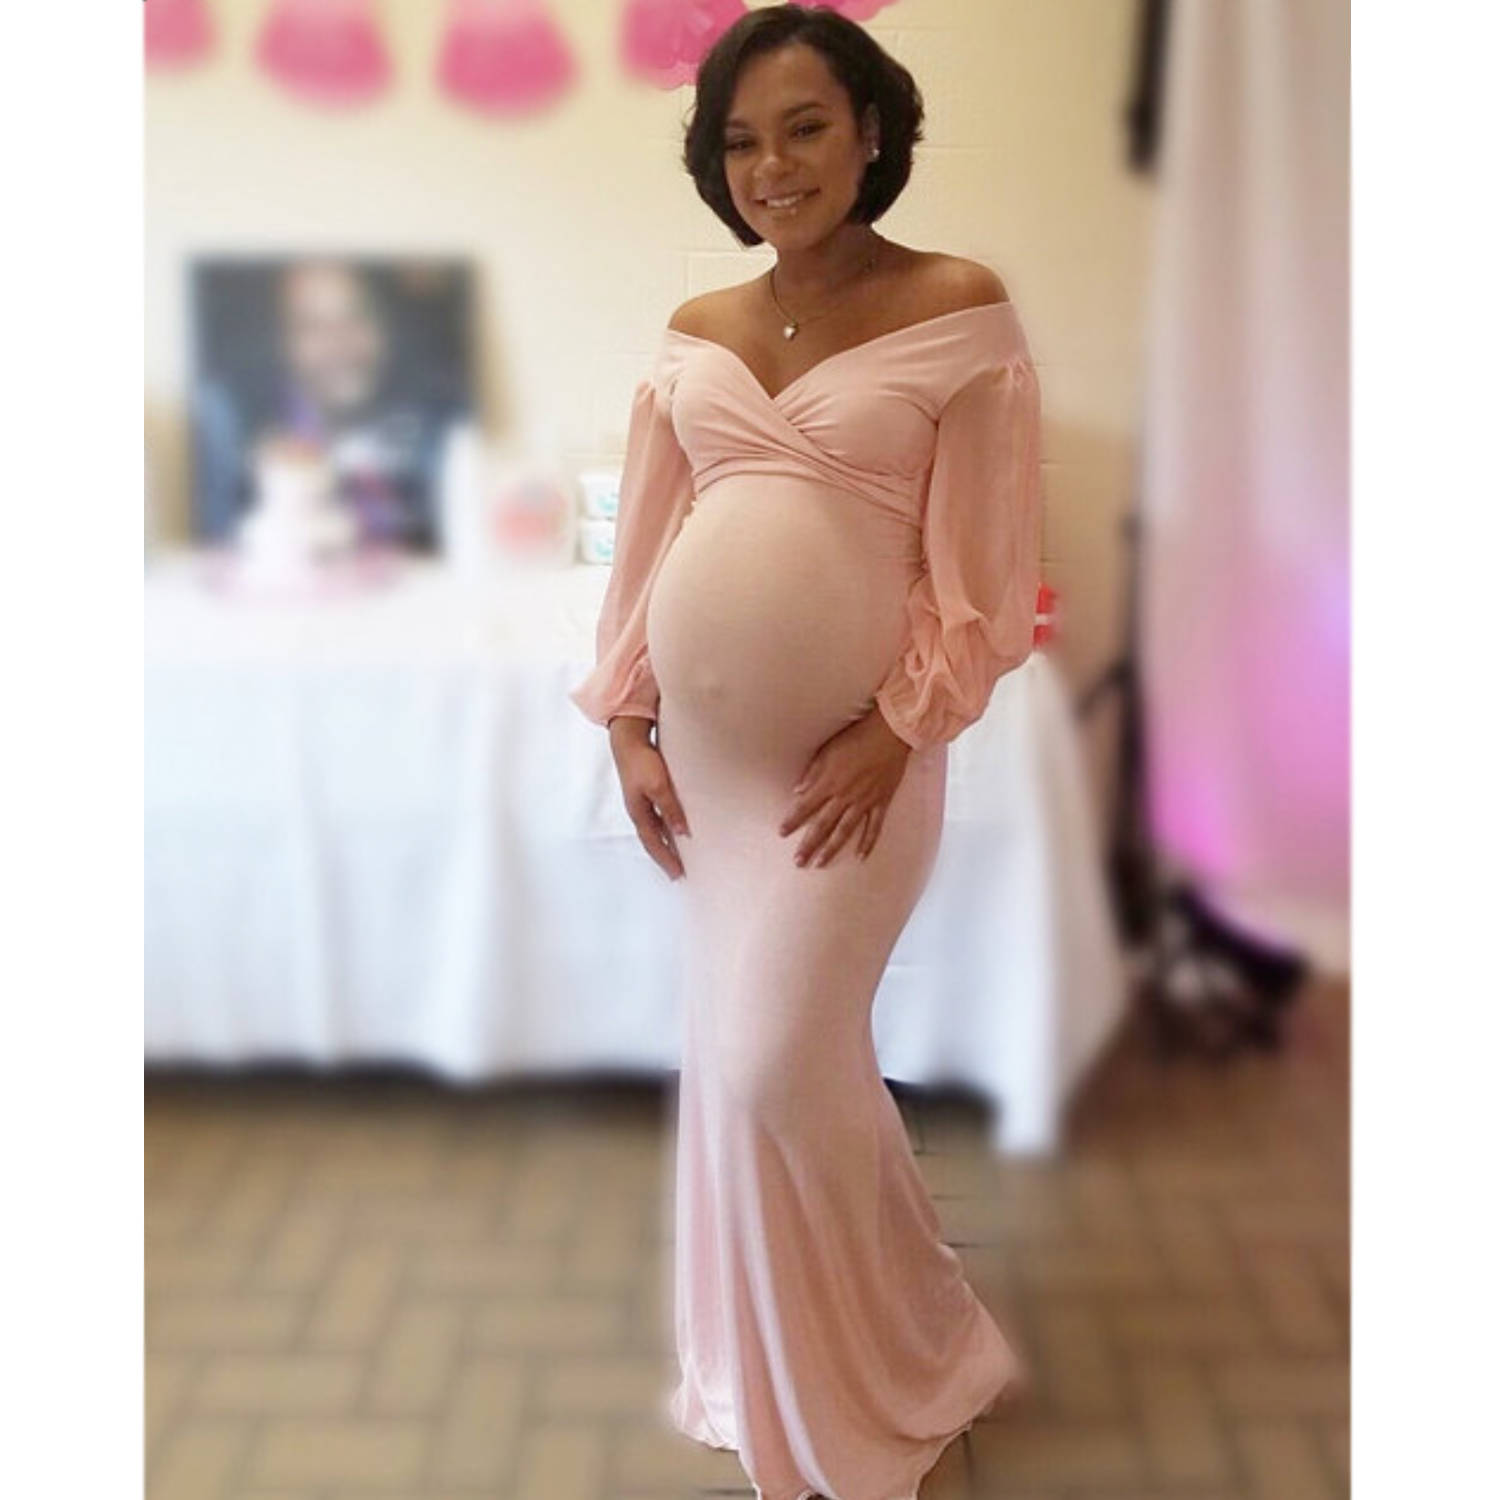 Full Size of Baby Shower:what To Wear To A Baby Shower In October Mom And Dad Baby Shower Outfits Petite Maternity Dresses For Baby Shower Maternity Blouses For Baby Shower A Pea In The Pod Maternity Clothes Maternity Dresses Formal 2 Searches Left. What Should I Wear To My Baby Shower